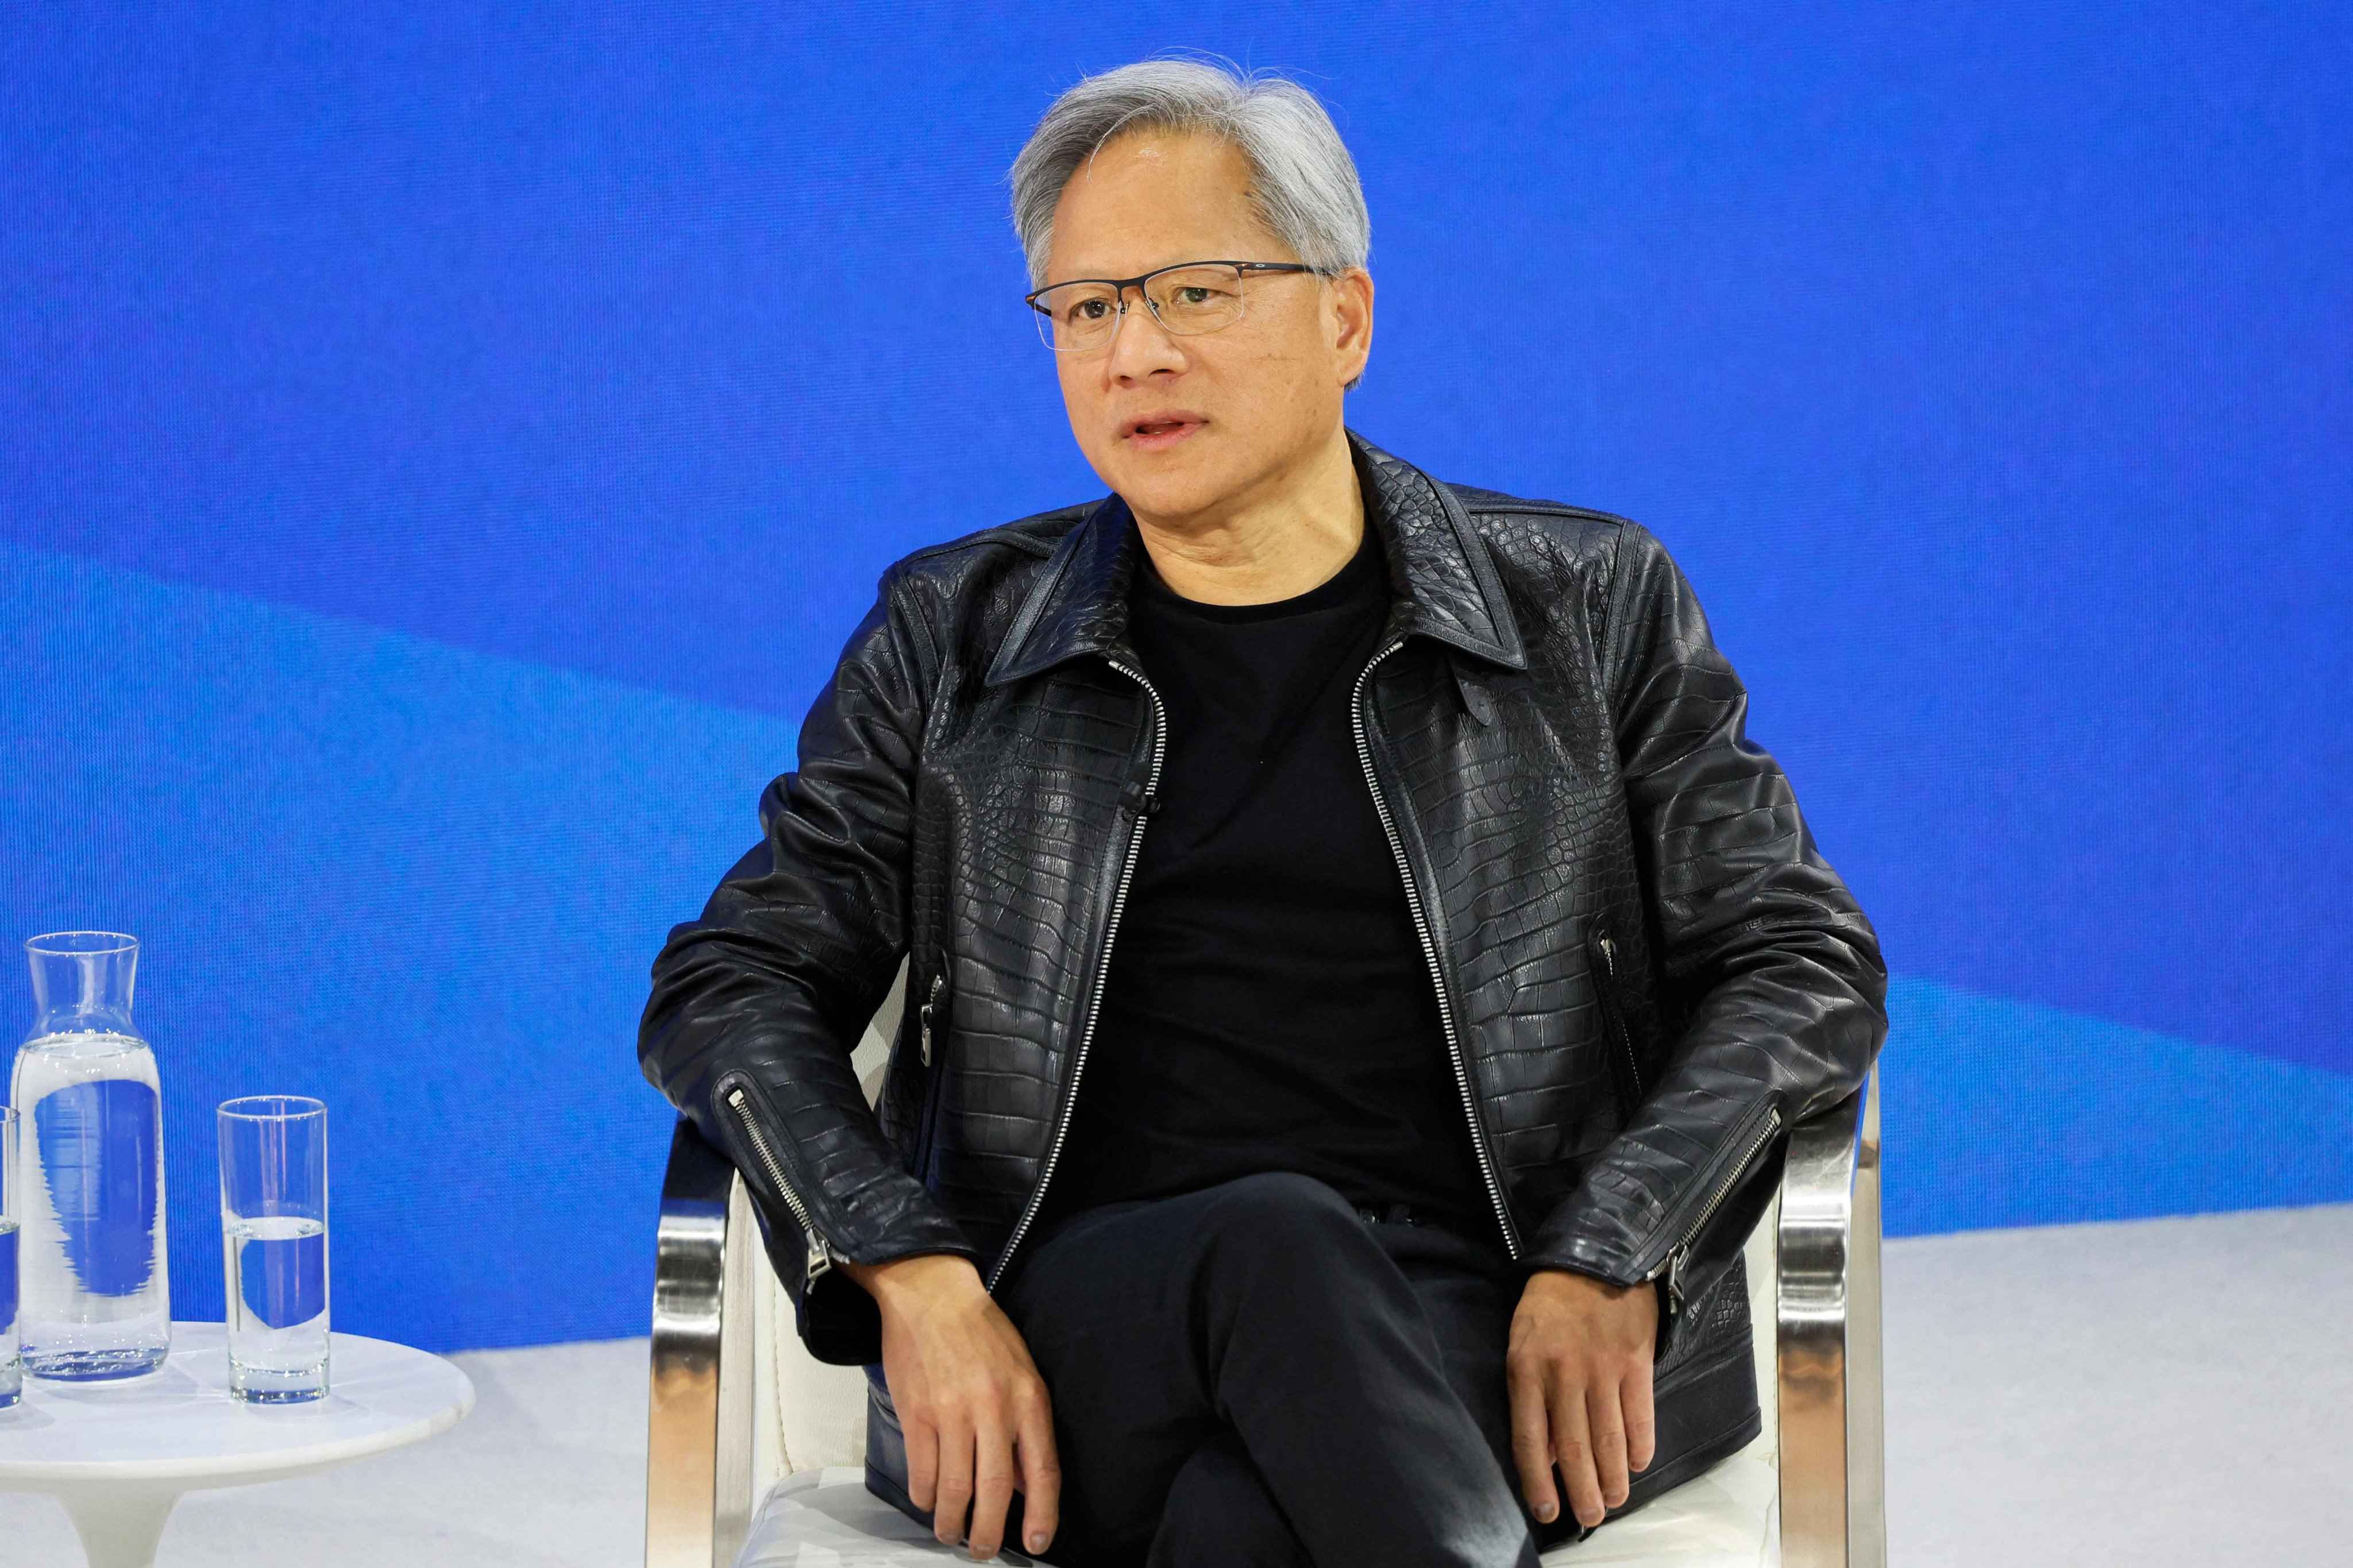 Jensen Huang, founder and CEO of Nvidia, spoke at The New York Times annual DealBook summit on Wednesday in New York. Photo: Getty Images via AFP